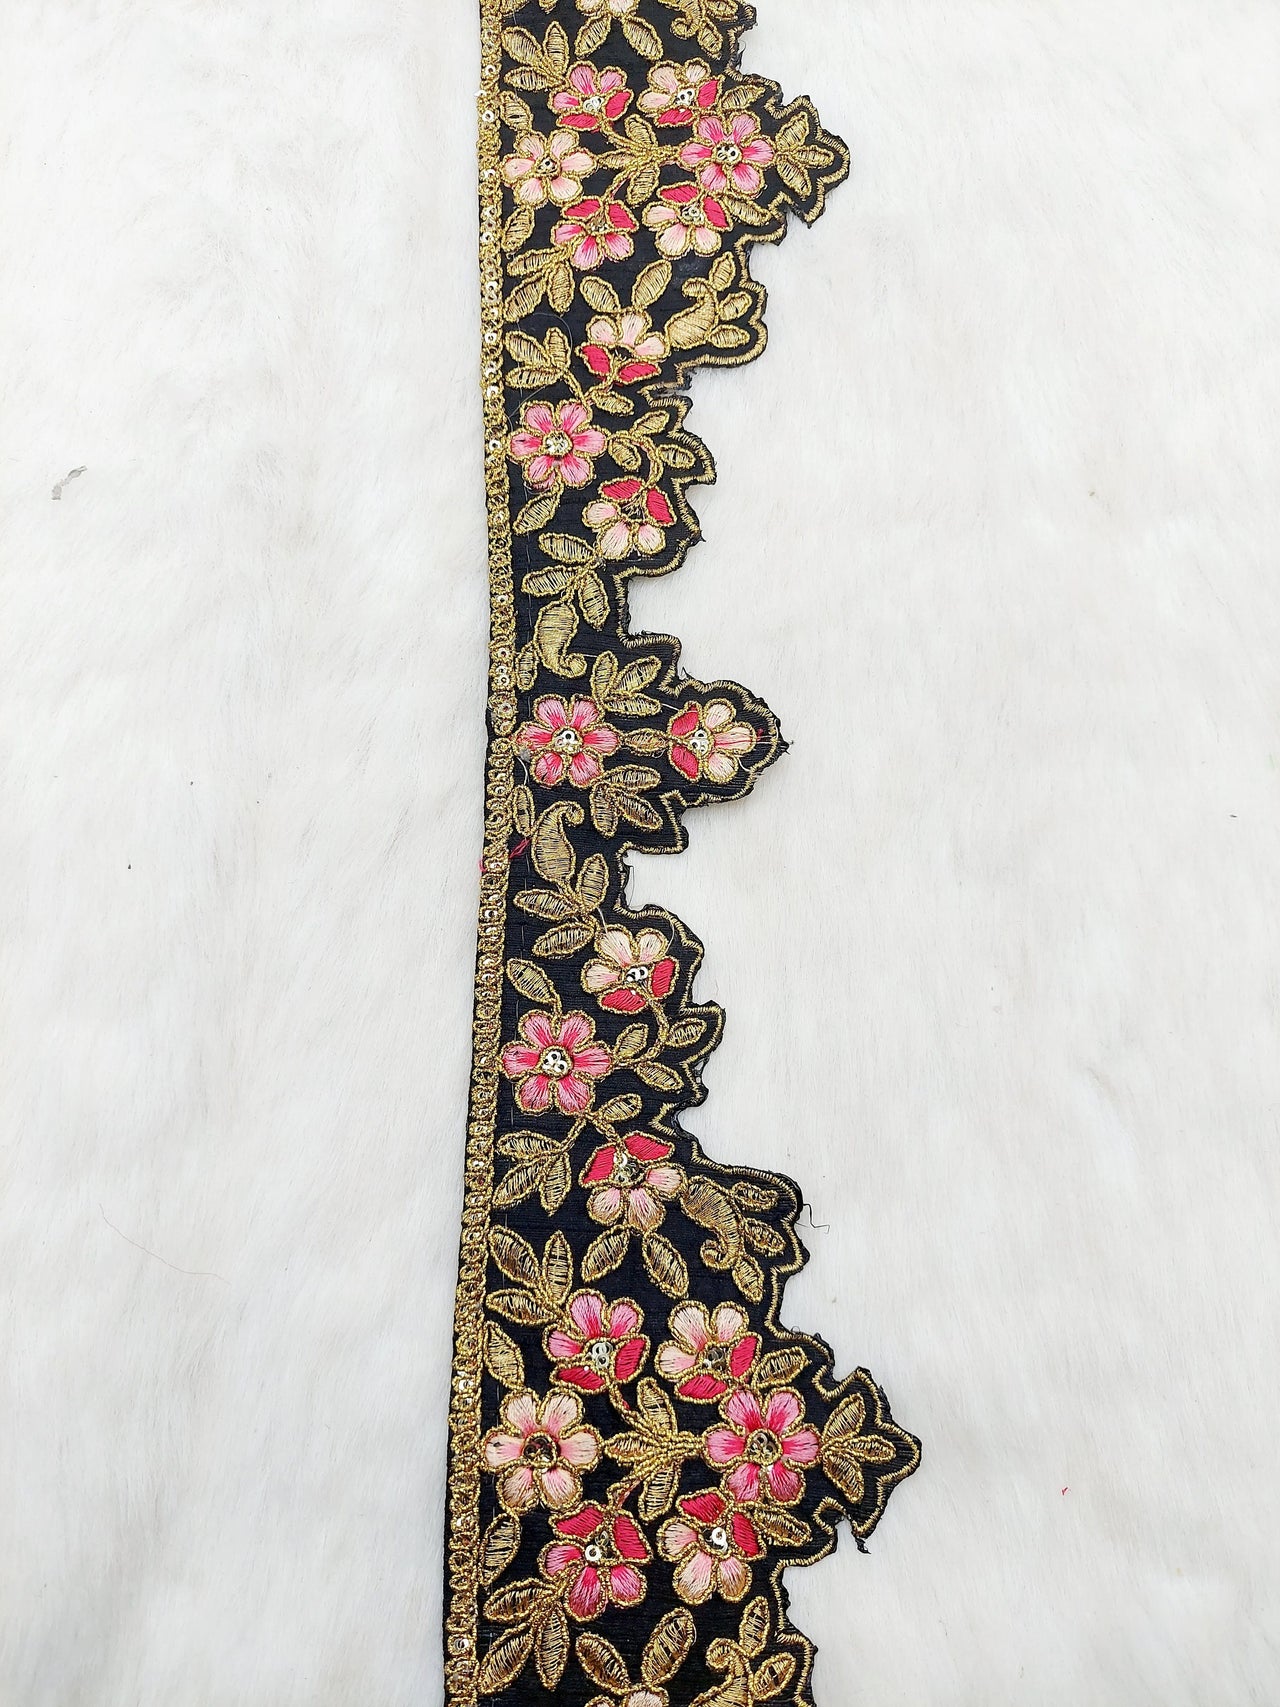 Hand Embroidered Cutwork Lace Trim In Gold Floral Embroidery, Sari Border, Trim by Yard